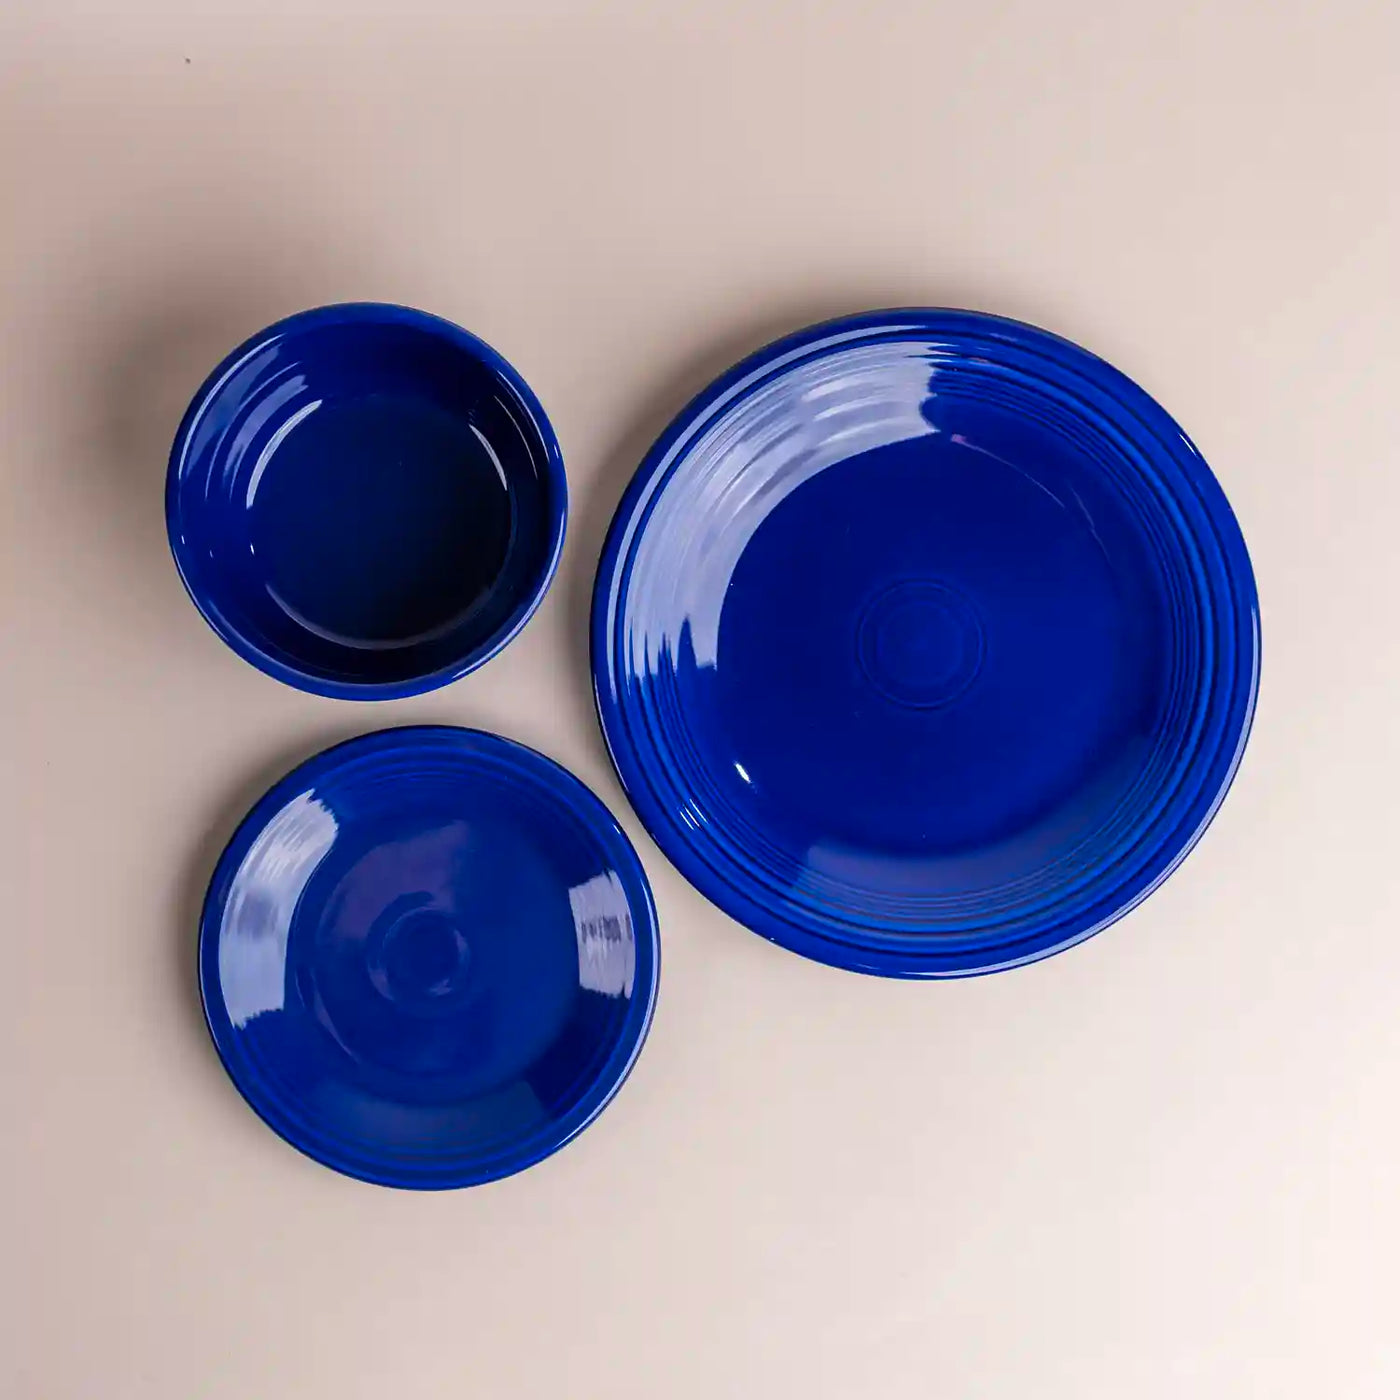 Fiesta twilight blue dinner plate salad plate and gusto bowl. Lay flat. Aerial view. 